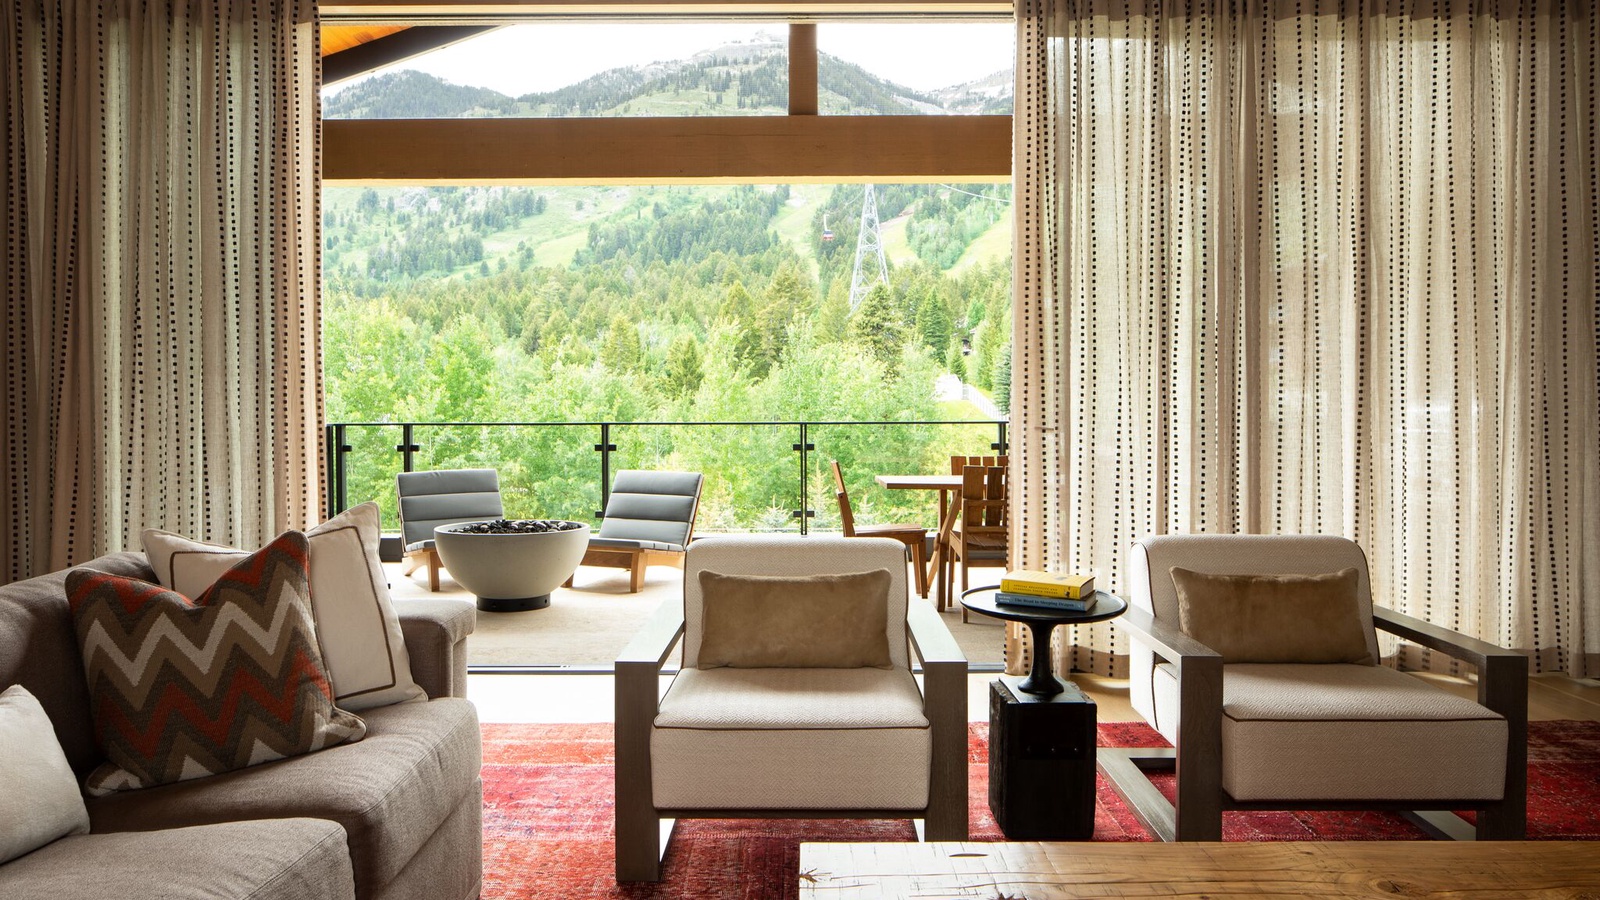 Great Room and Patio - Four Bedroom Suite - Caldera House Teton Village, WY